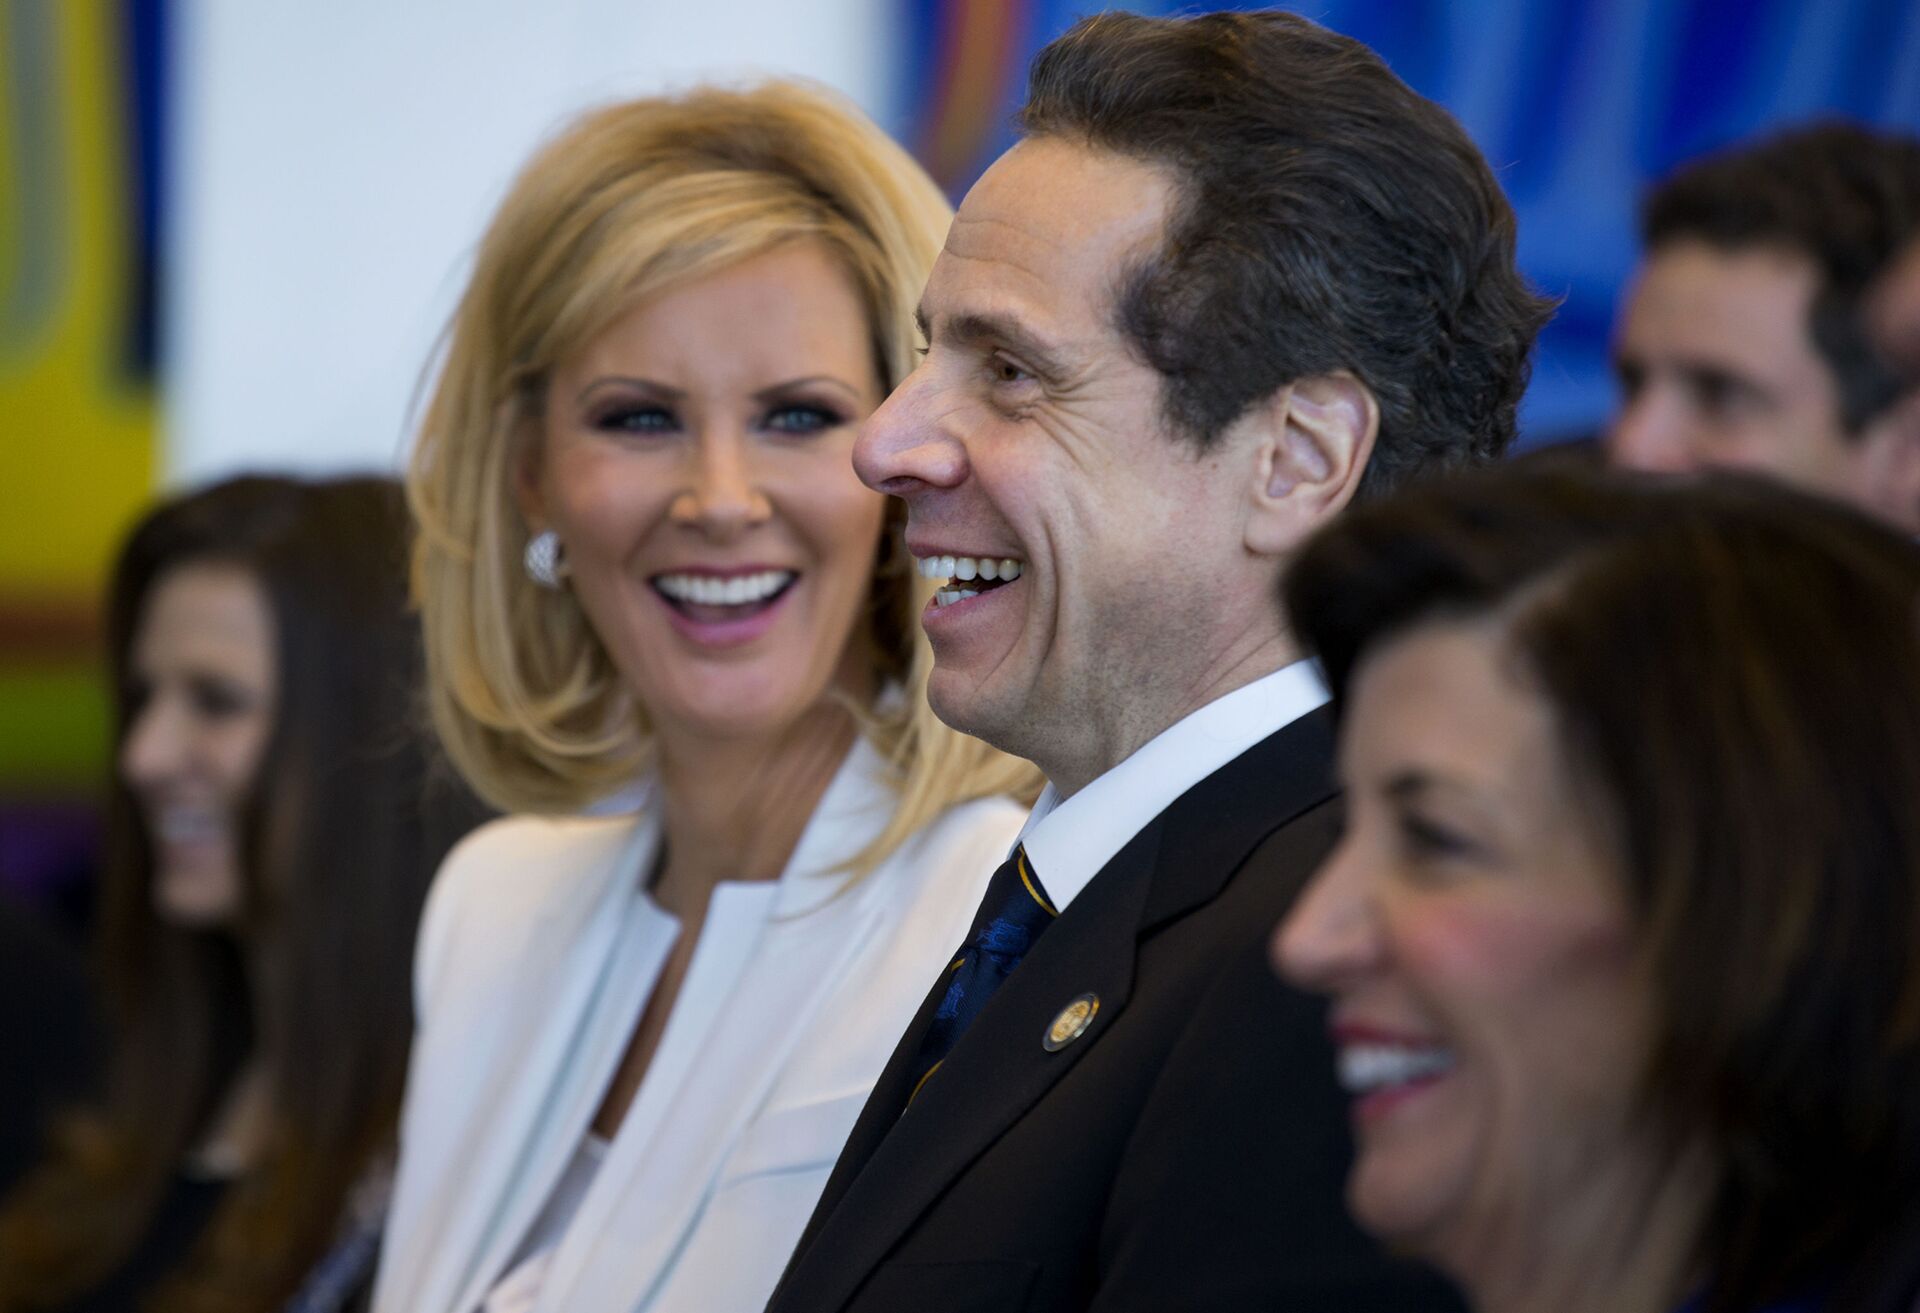 Andrew Cuomo Reportedly Bad-Mouthed Jewish Holiday Ritual, Used Anti-Transgender Slur With Aide - Sputnik International, 1920, 14.04.2021